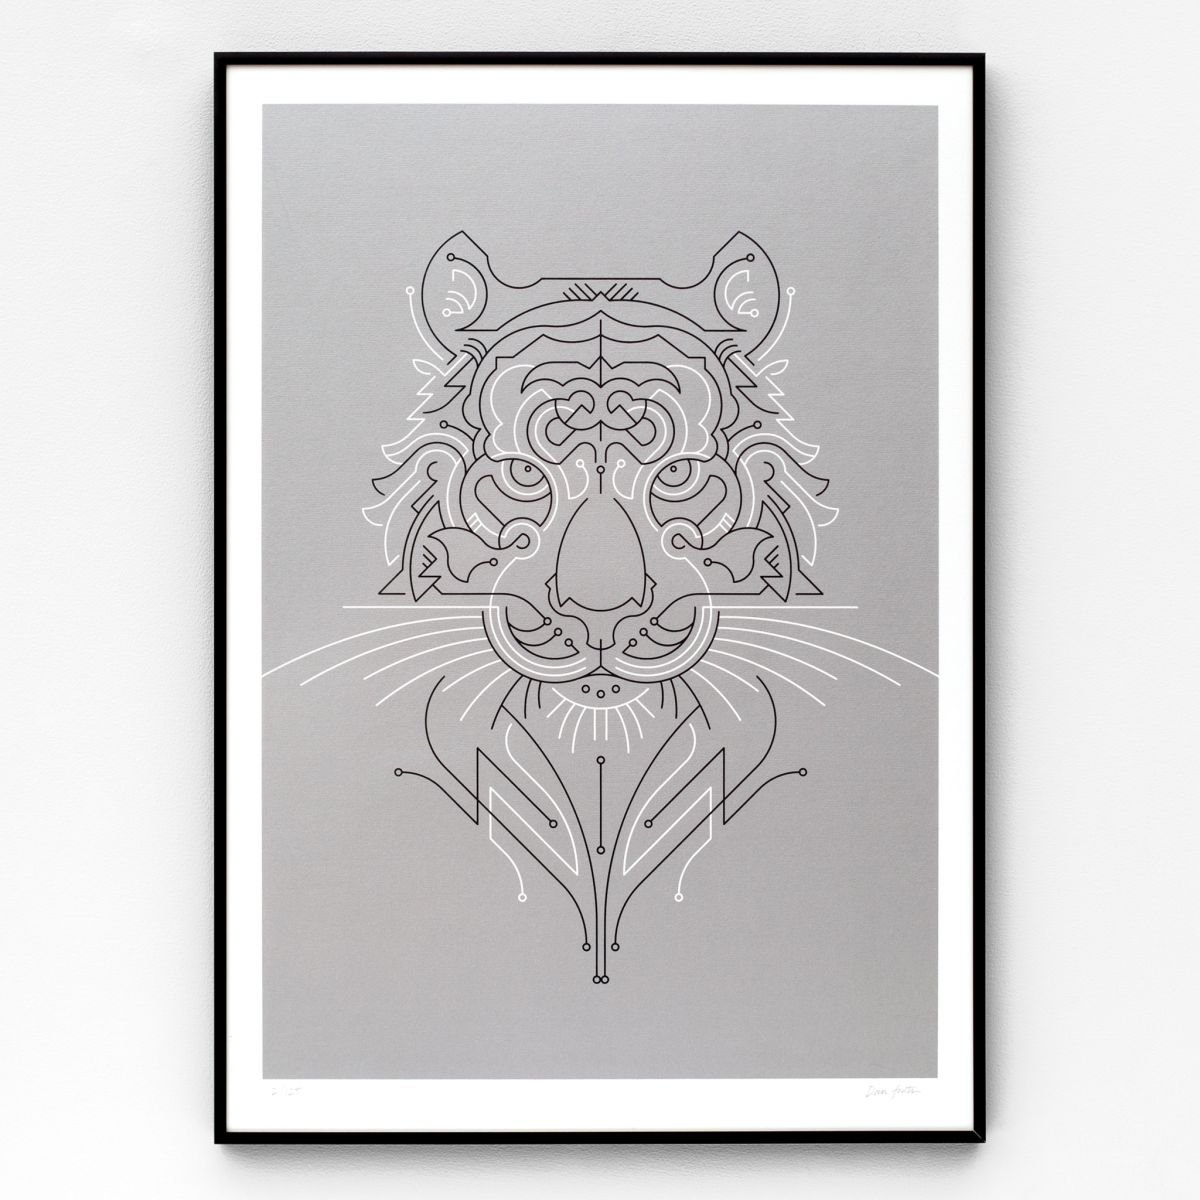 Tiger A2 limited edition screen print by The Lost Fox